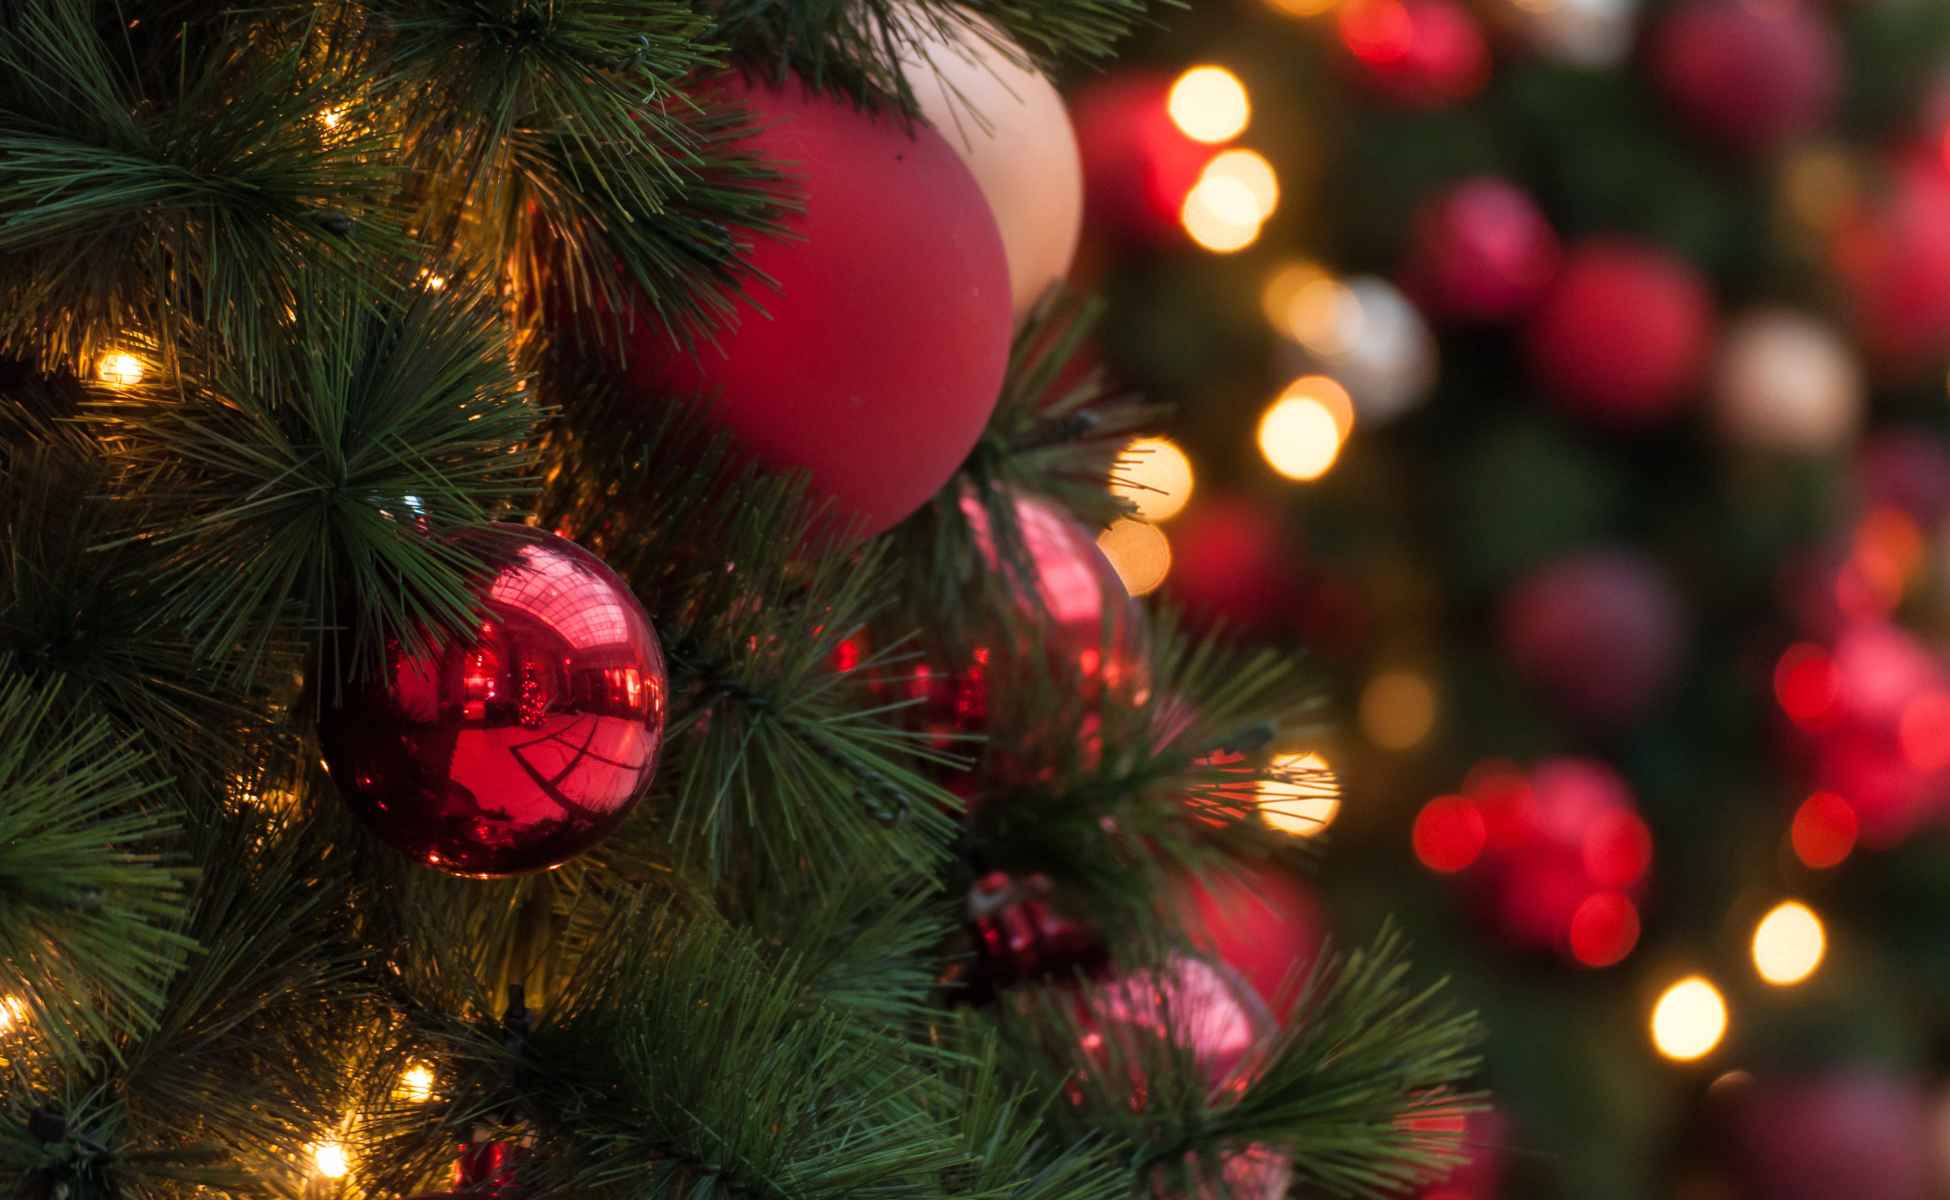 Close up photo of a Christmas tree with red and gold decorations